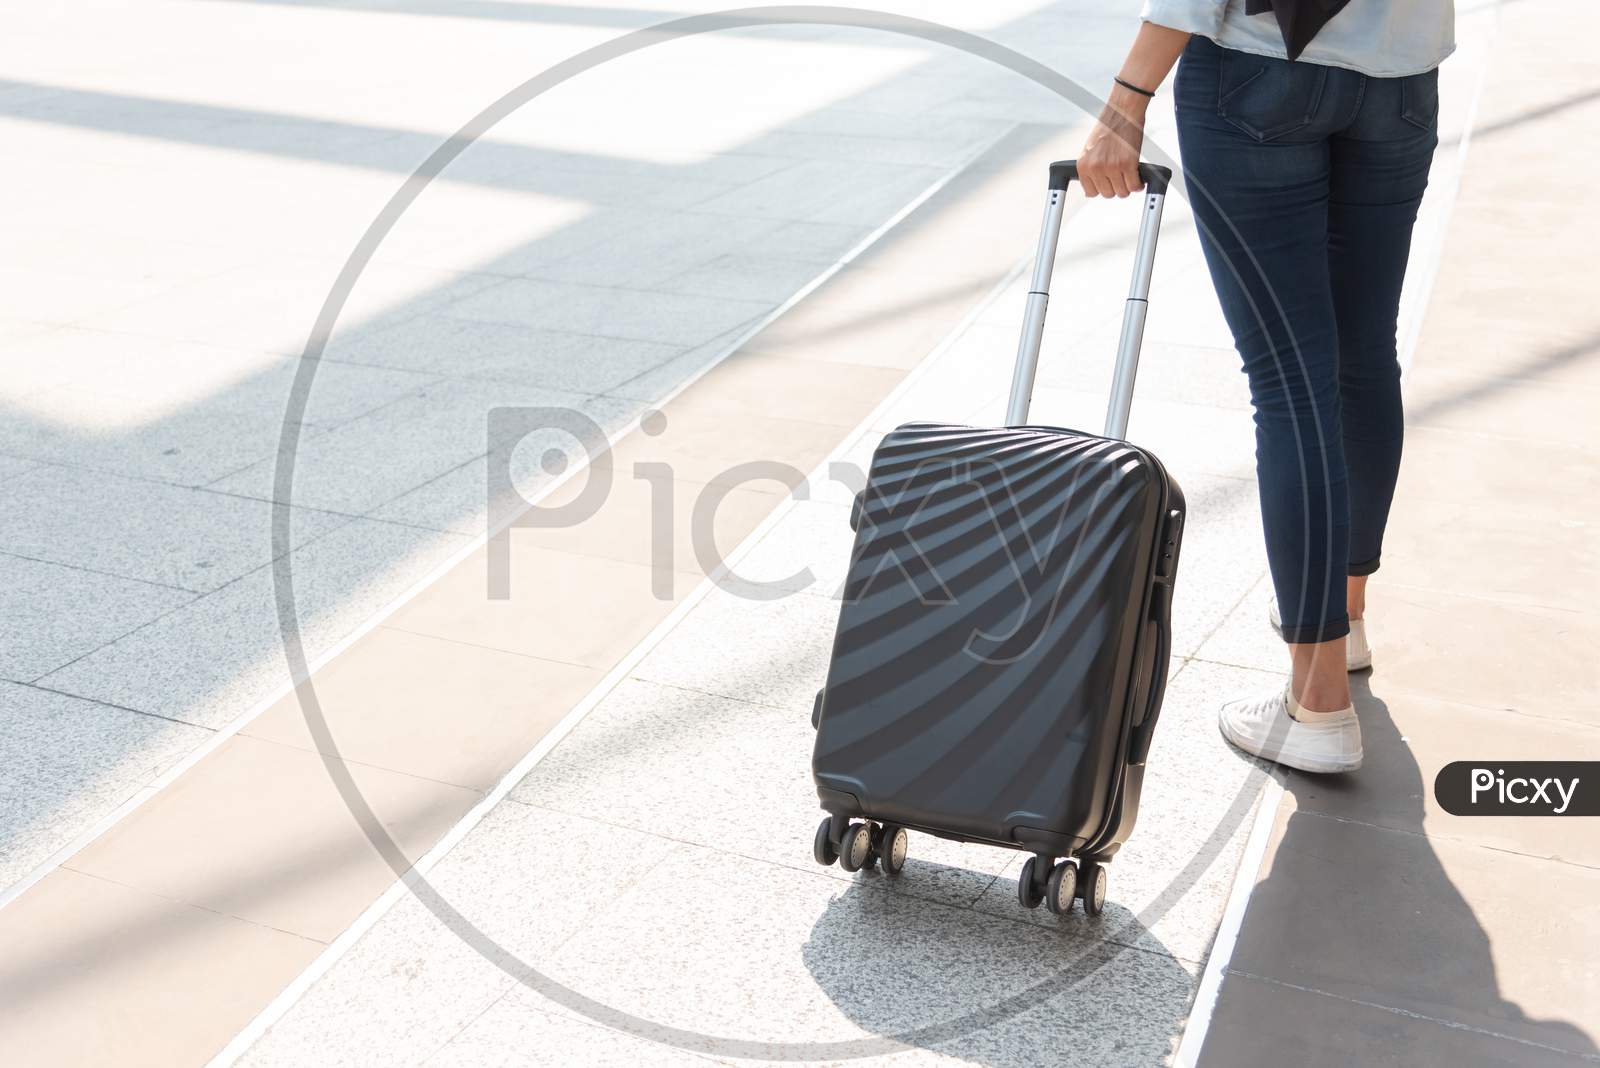 Close Up Woman And Suitcase Trolley Luggage In Airport. People And Lifestyles Concept. Travel And Business Trip Theme. Woman Wear Jeans Going On Tour And Traveling Around The World By Alone Solo Girl